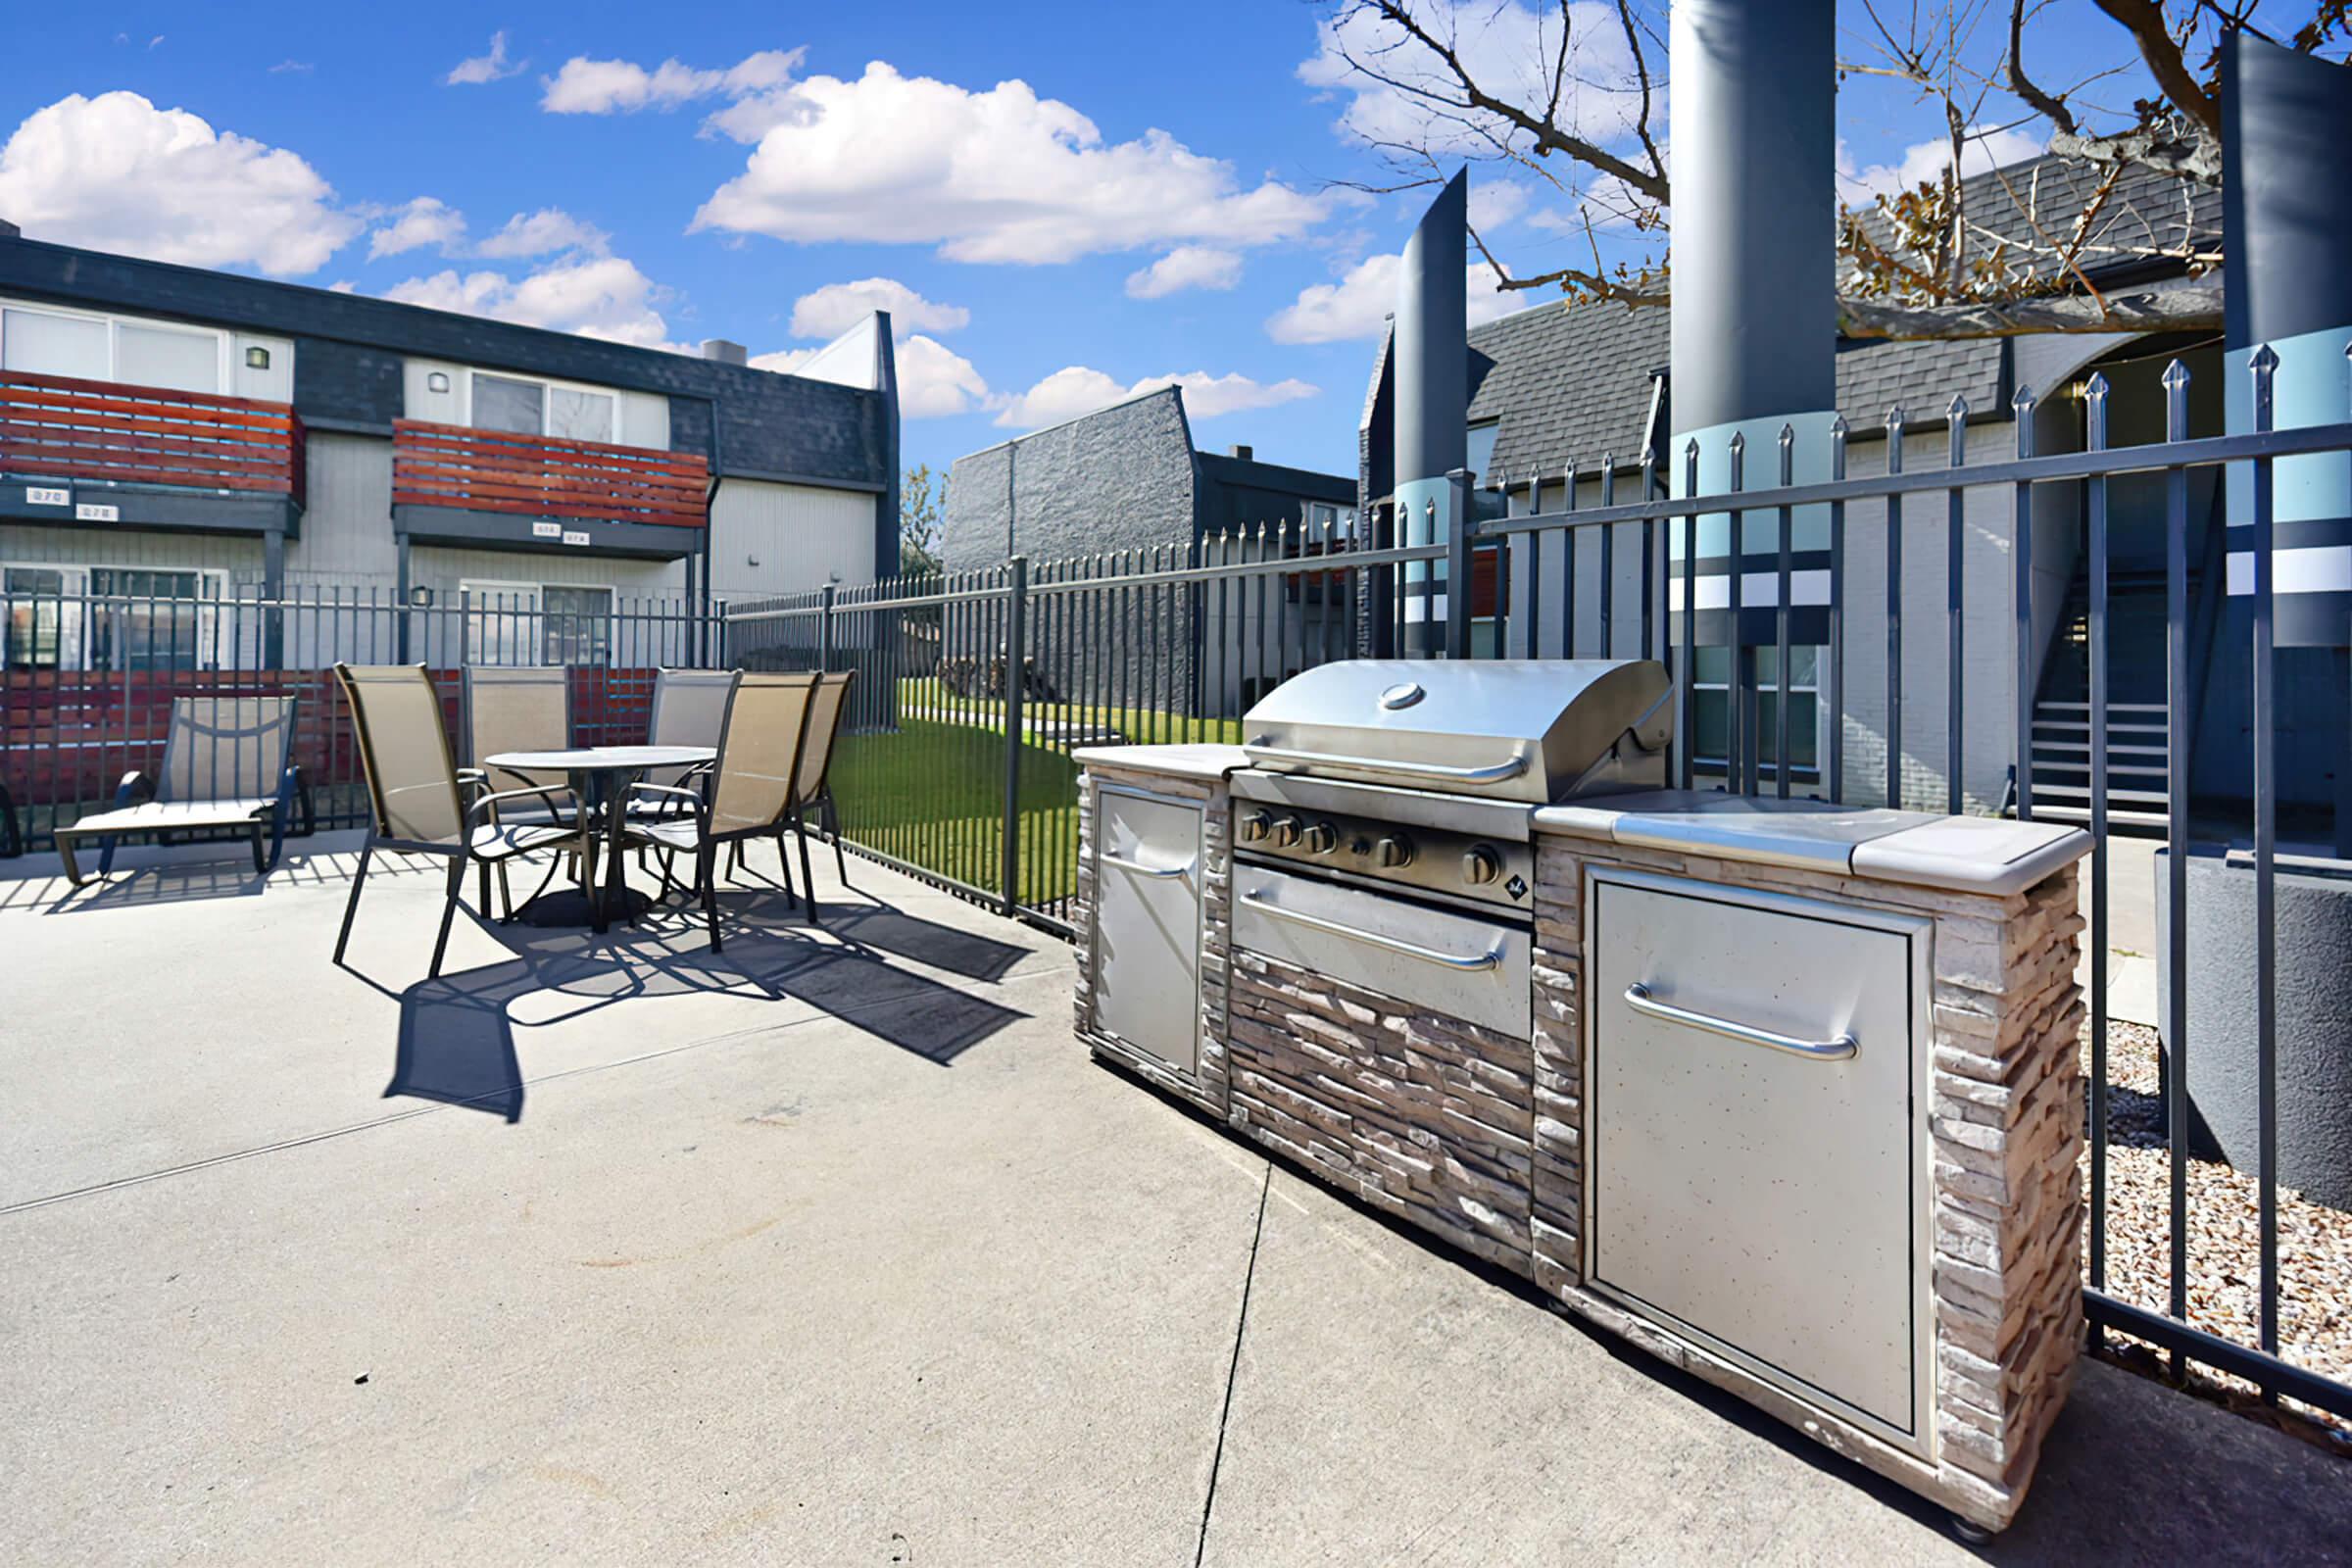 Stainless steel barbecue with a table and chairs